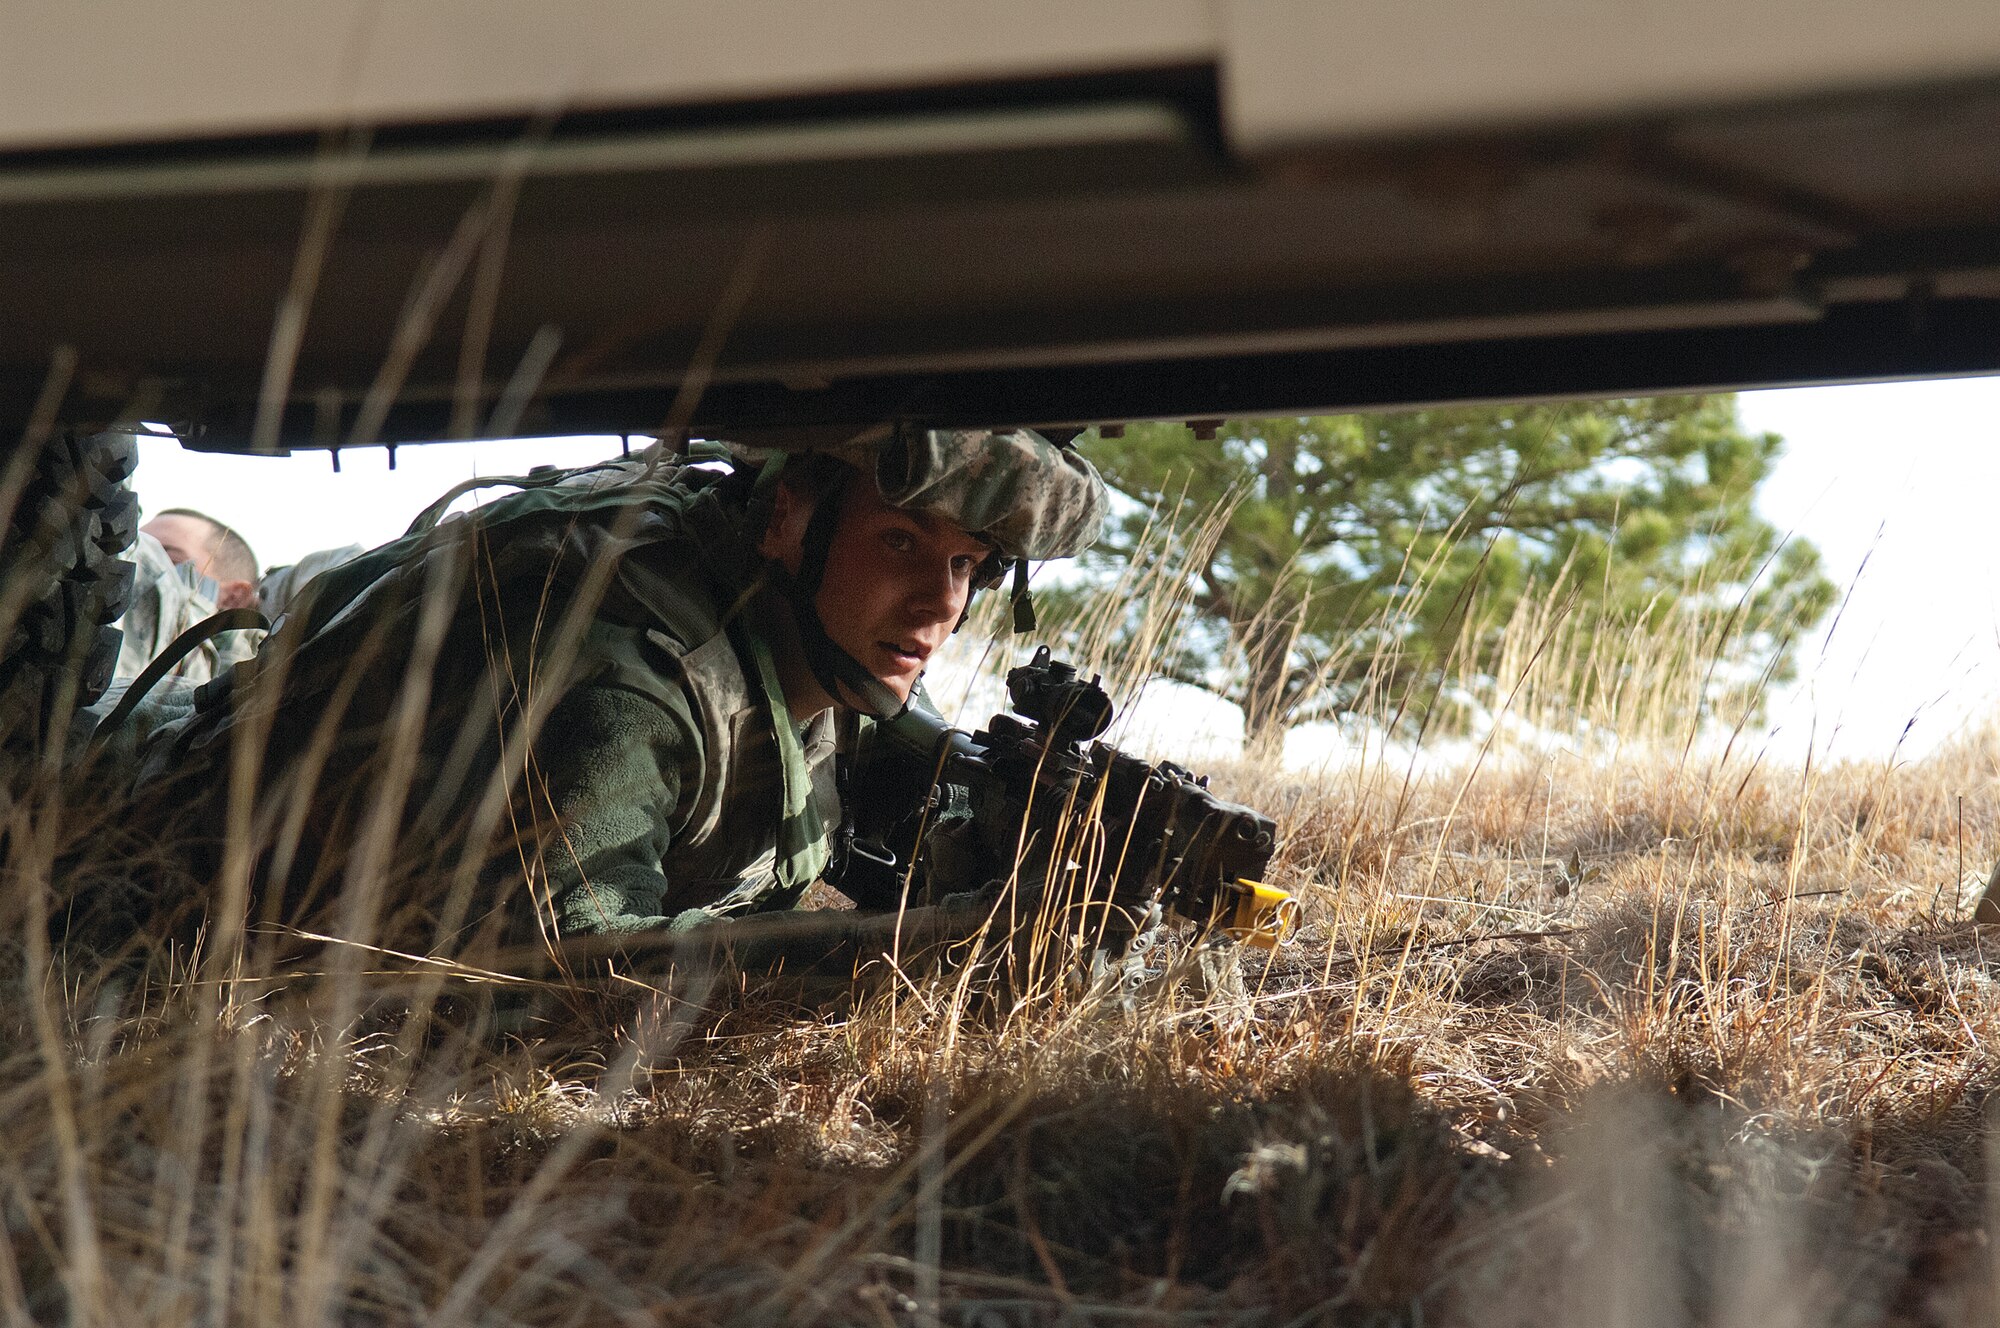 Airmen 1st Class Owen Erickson, 790th Missile Security Forces Squadron, peers from under a Humvee looking for the opposition forces during Road Warrior X, a training exercise conducted by the 620th Ground Combat Training Squadron at Camp Guernsey, Wyo., Oct. 19. (U.S. Air Force photo by R.J. Oriez)